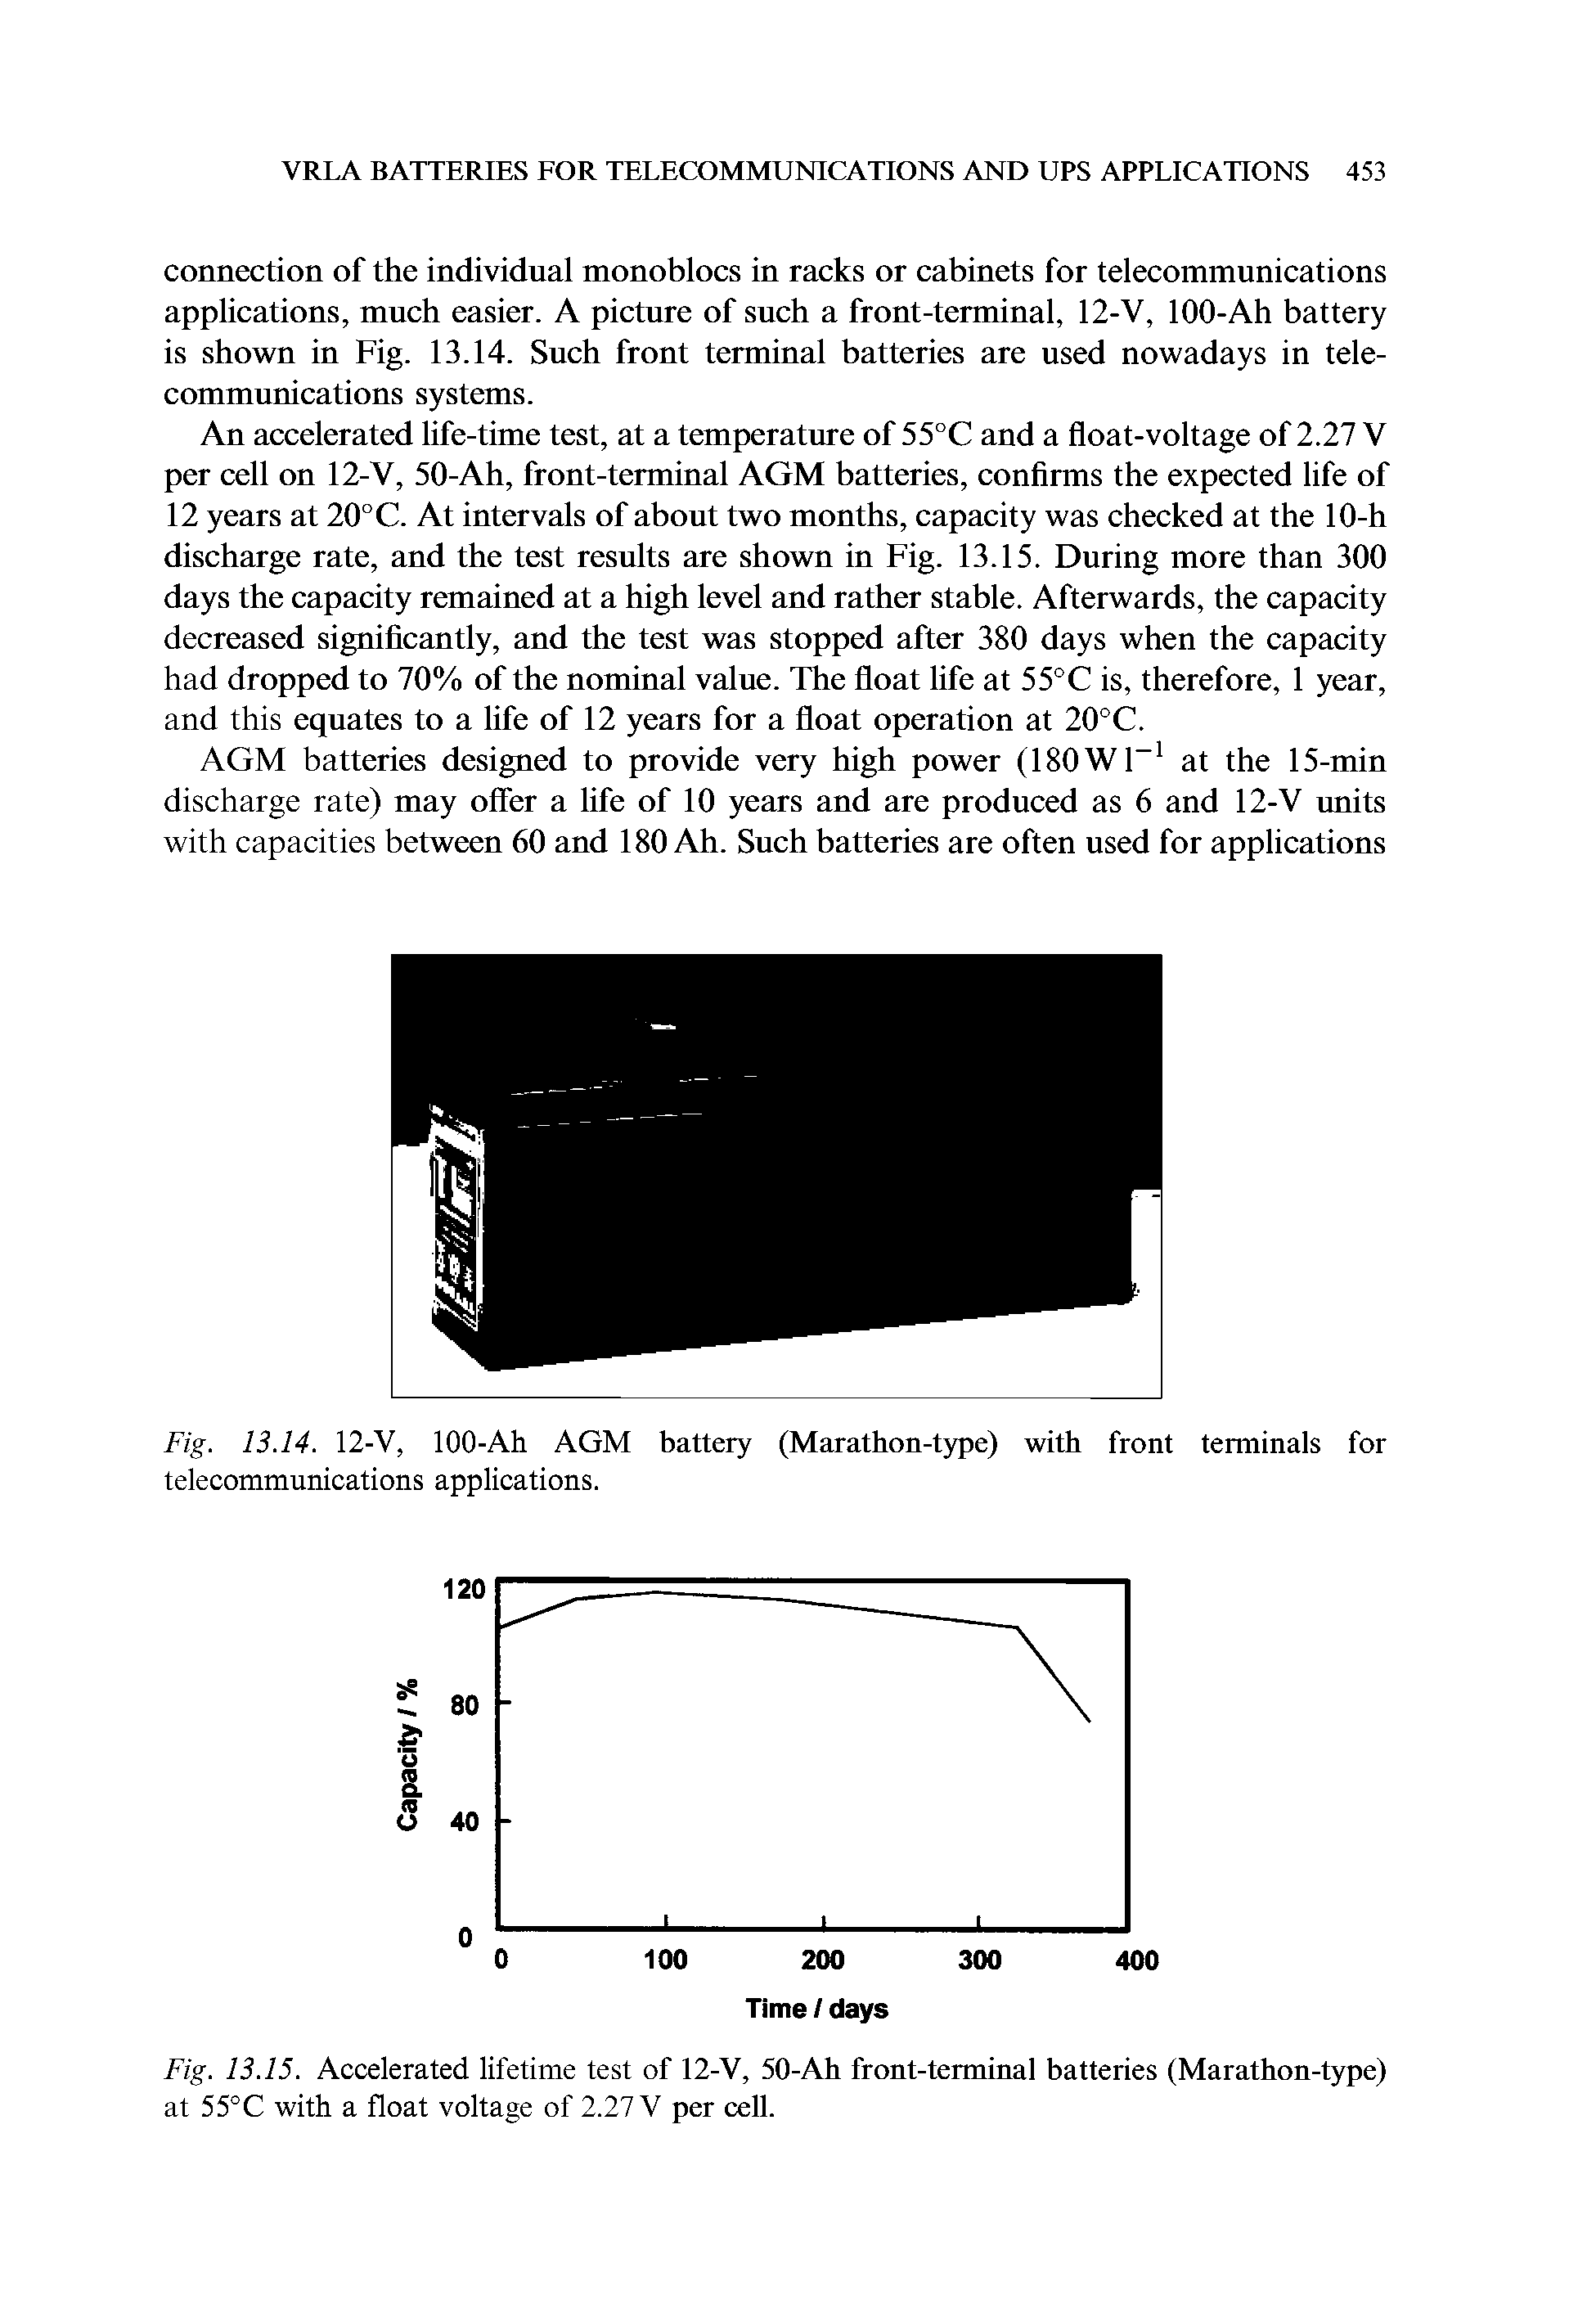 Fig. 13.14. 12-V, 100-Ah AGM battery (Marathon-type) with front terminals for telecommunications applications.